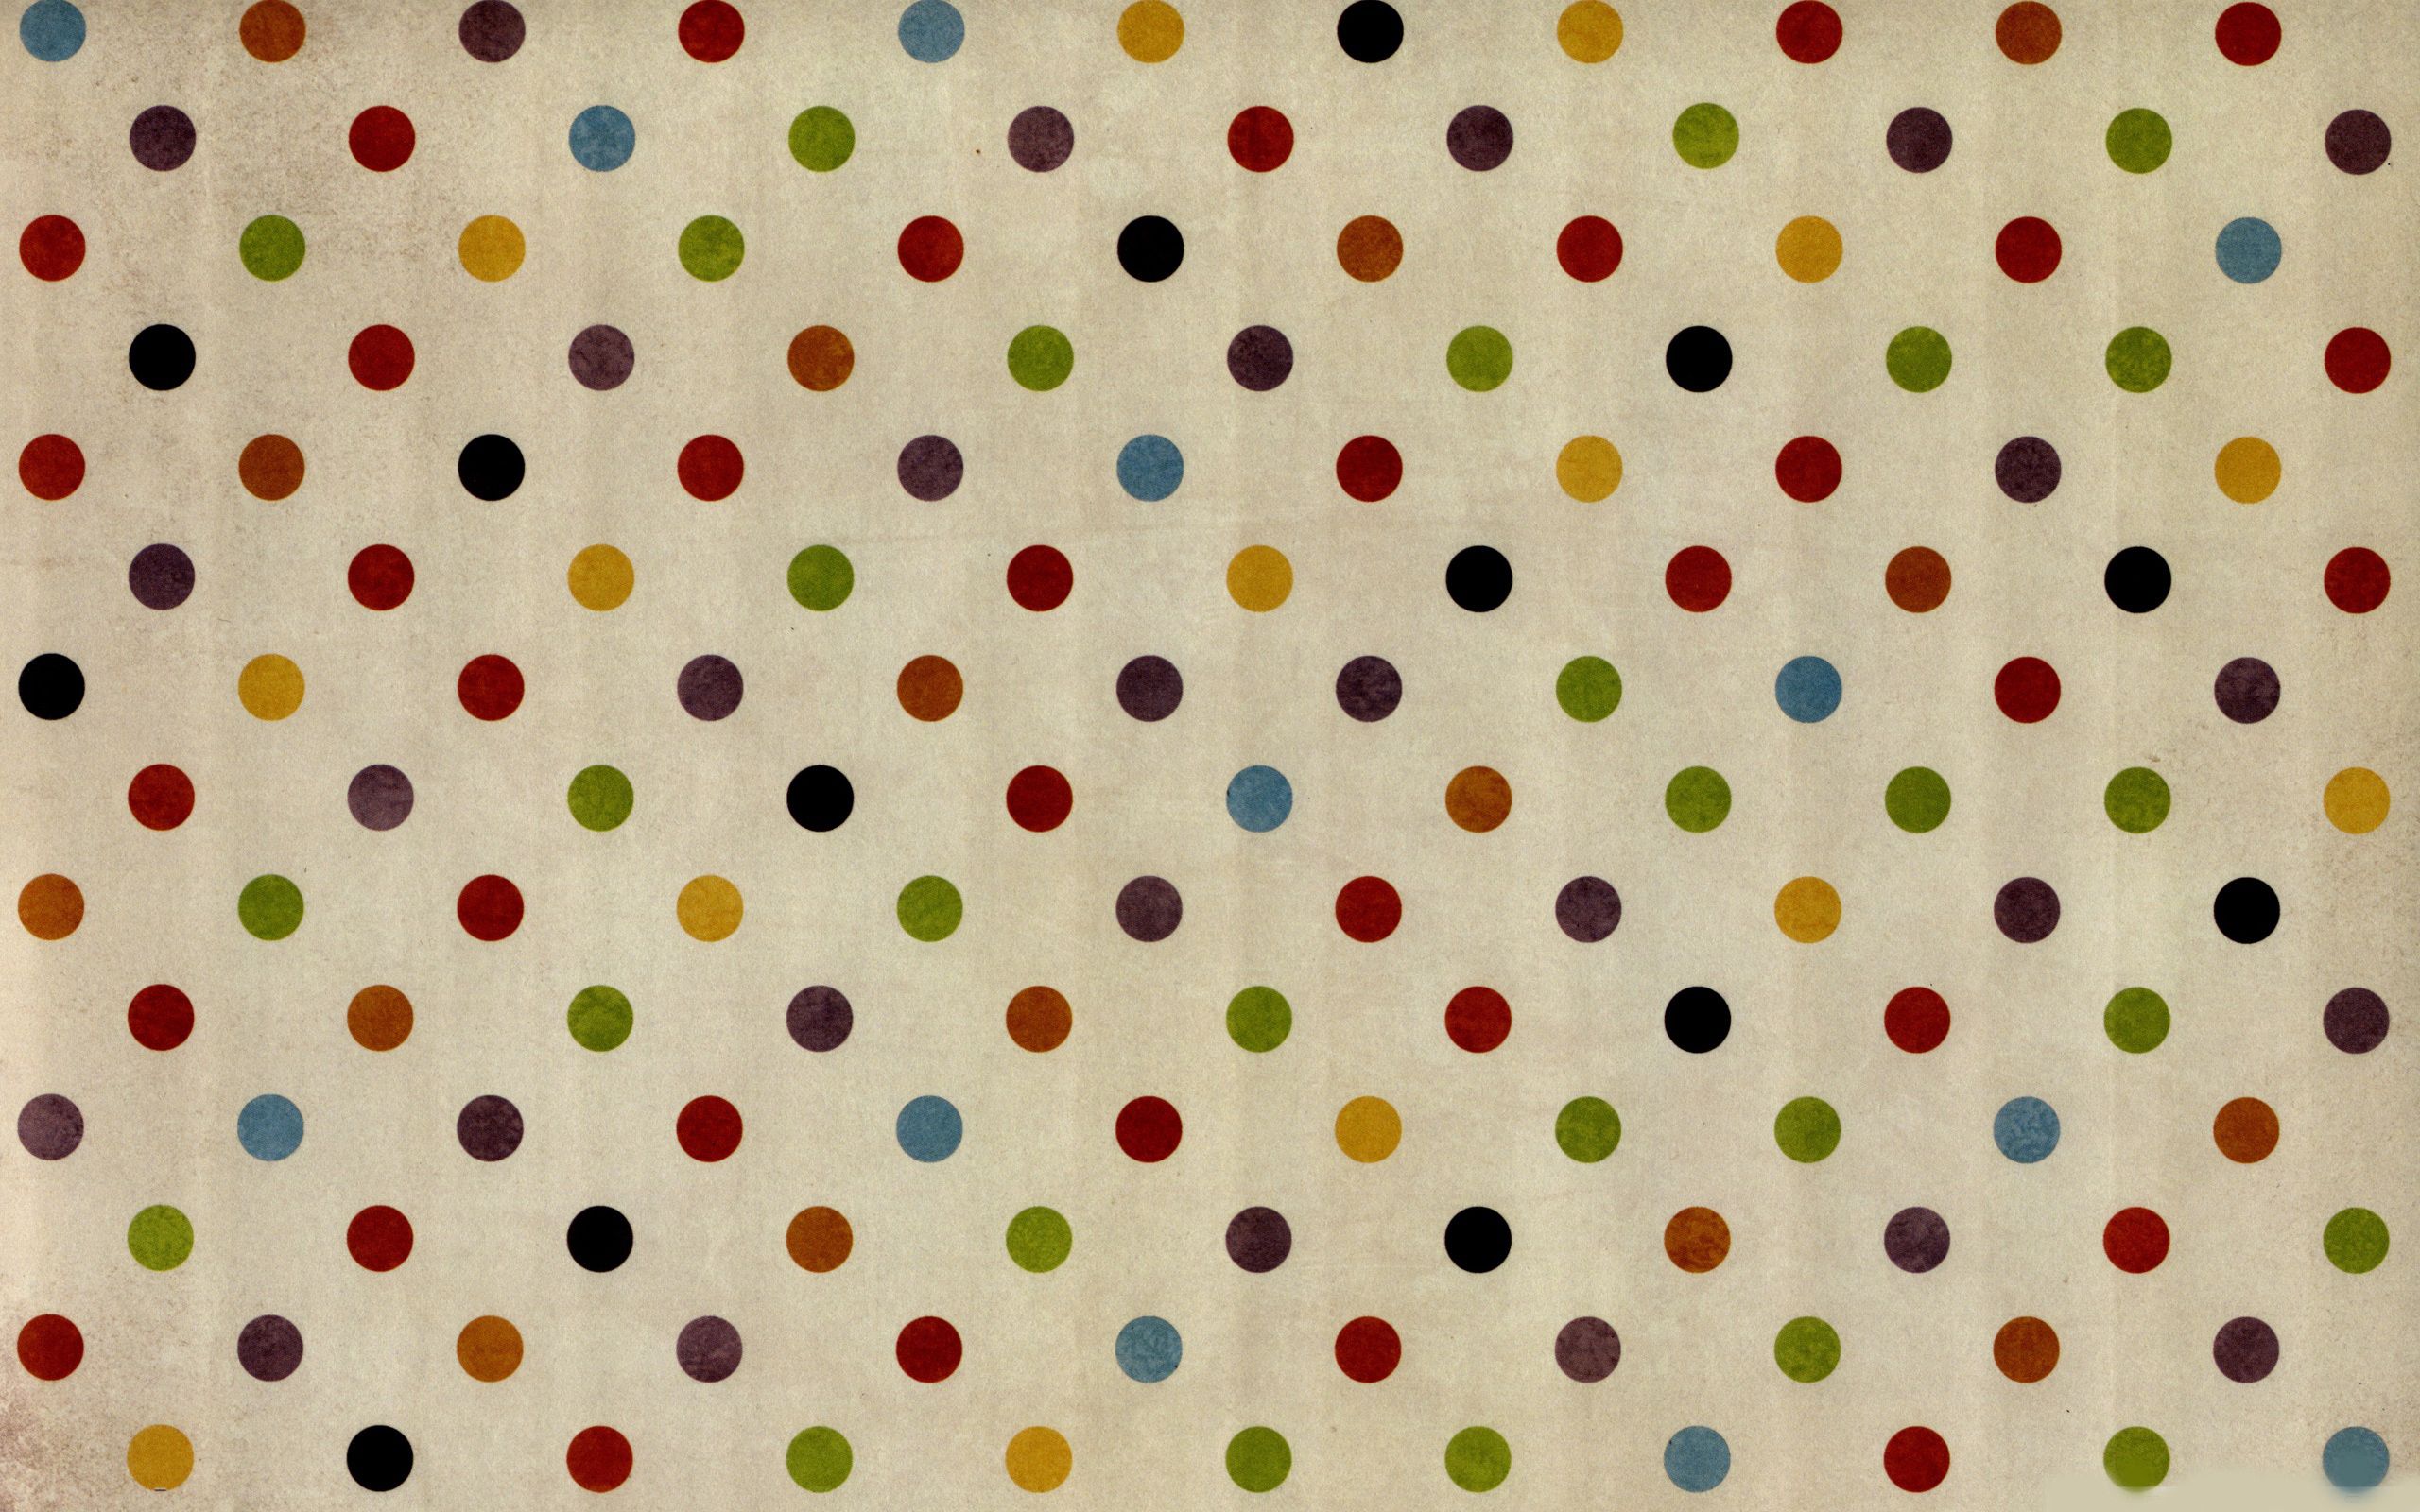 motley, texture, textures, circles, multicolored, surface images